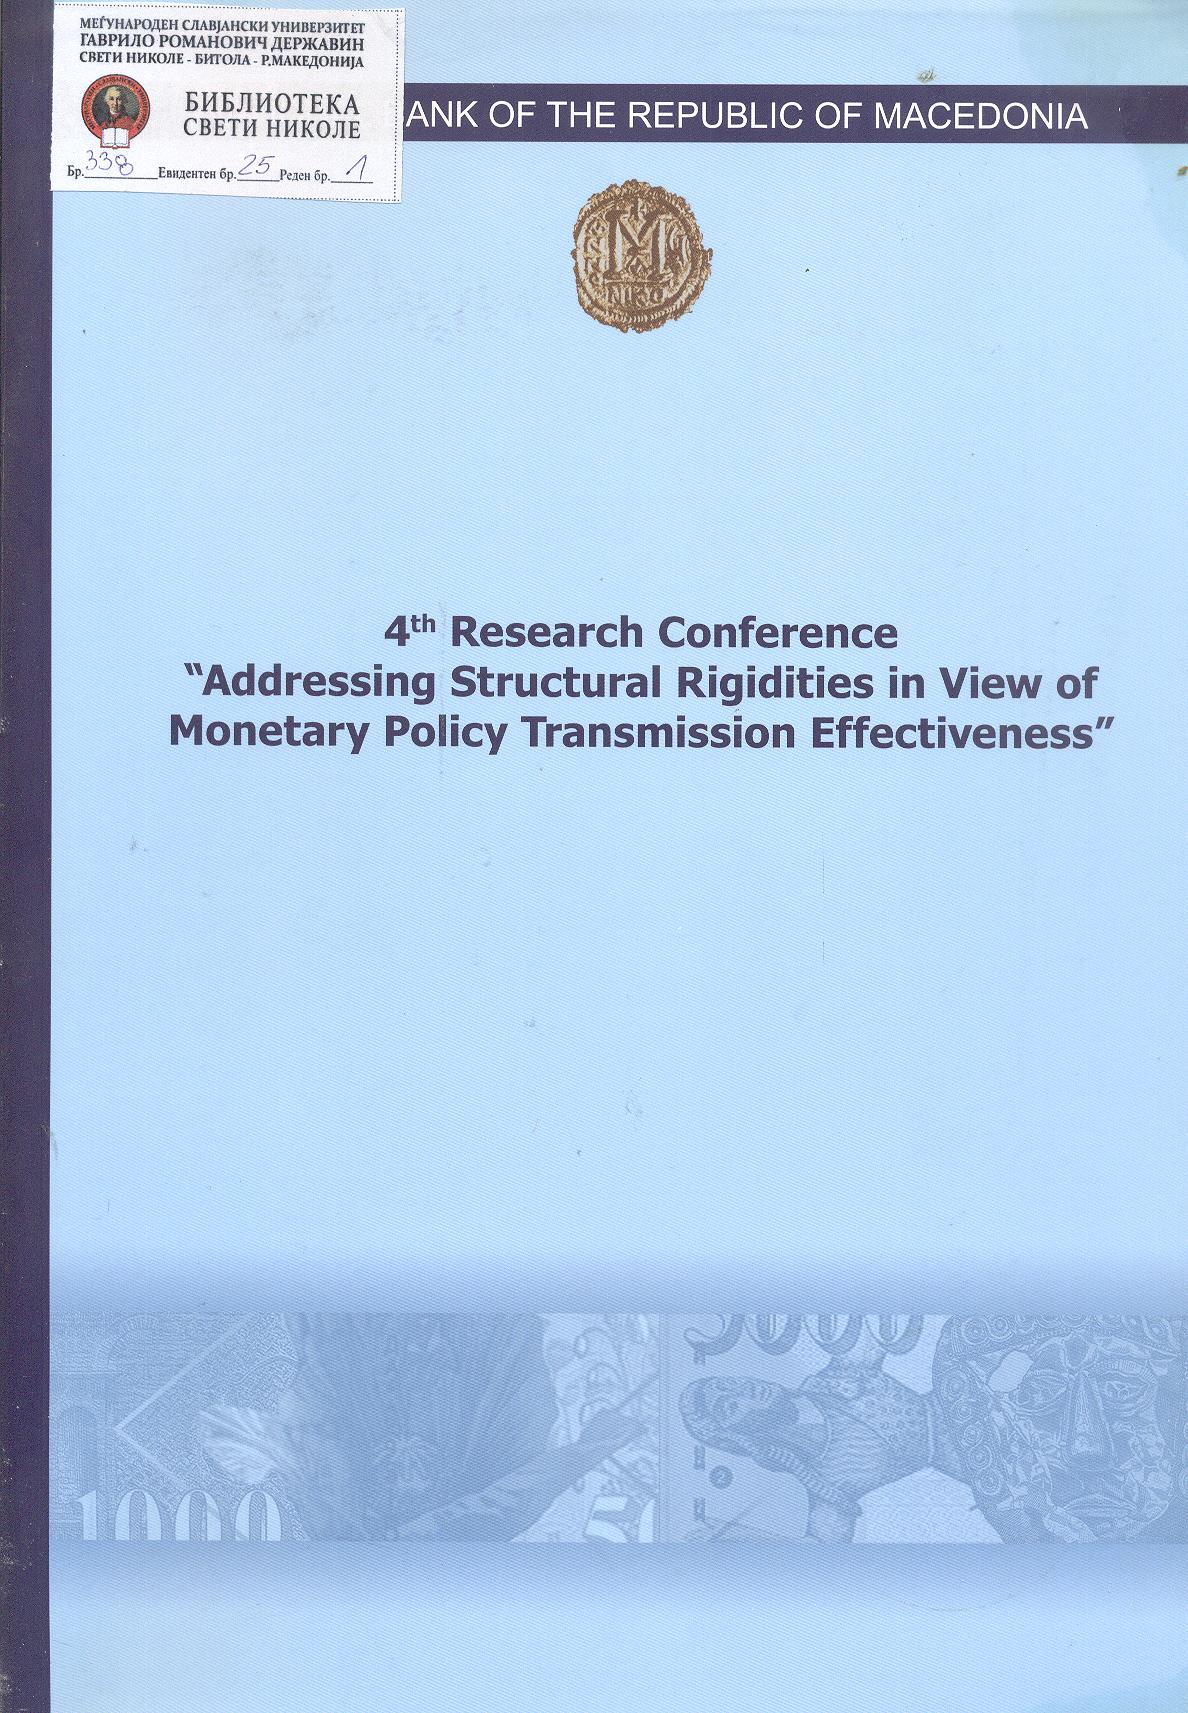 4th research conference „Addressing structural rigidities in view of monetary policy transmission effectiveness“